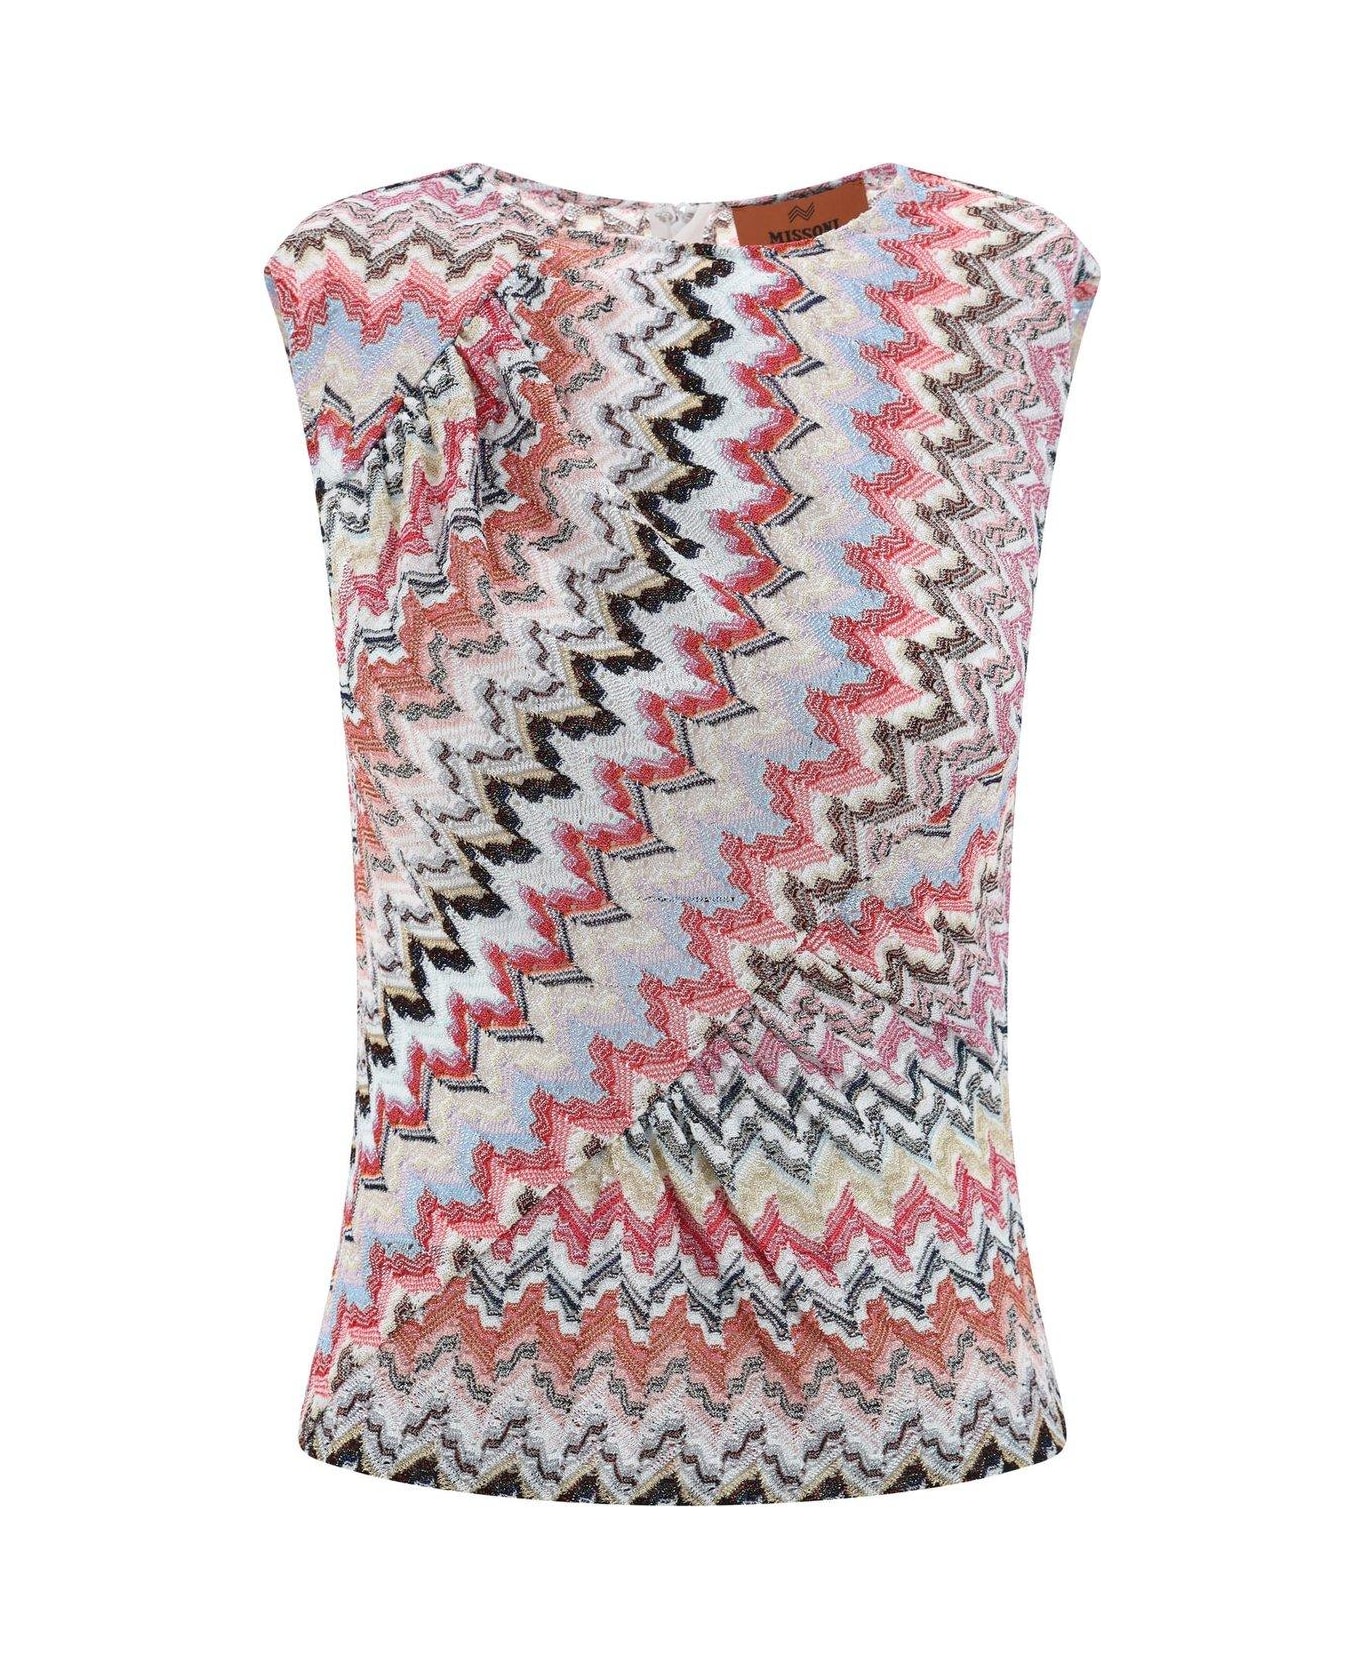 Missoni Zigzag Pattern Knitted Sleeveless Top - Multicolor タンクトップ